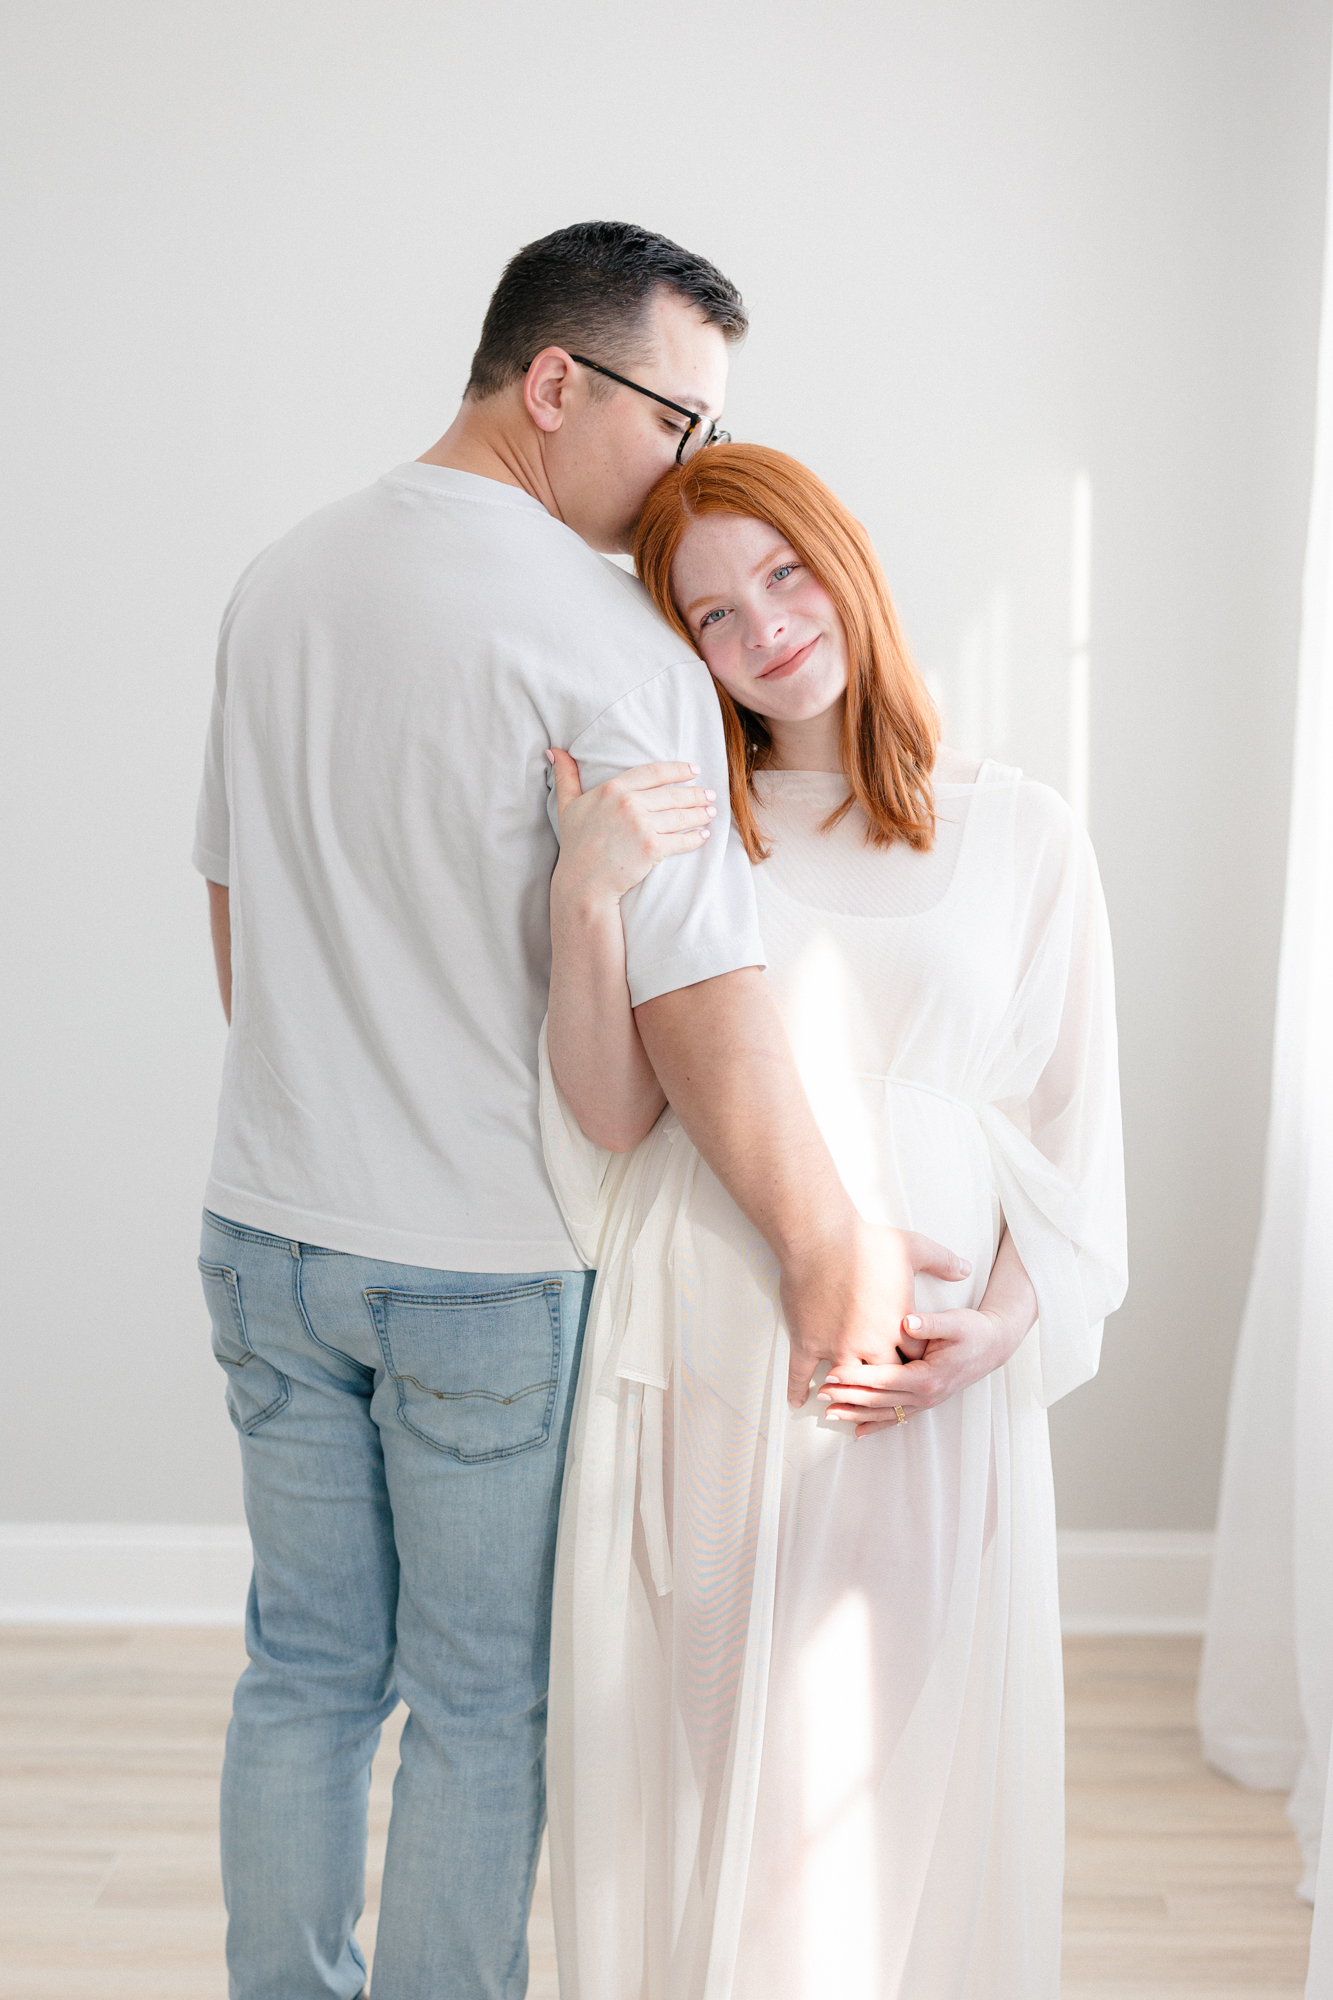 Mom and dad standing and embracing during their maternity session in a Louisville KY photography studio